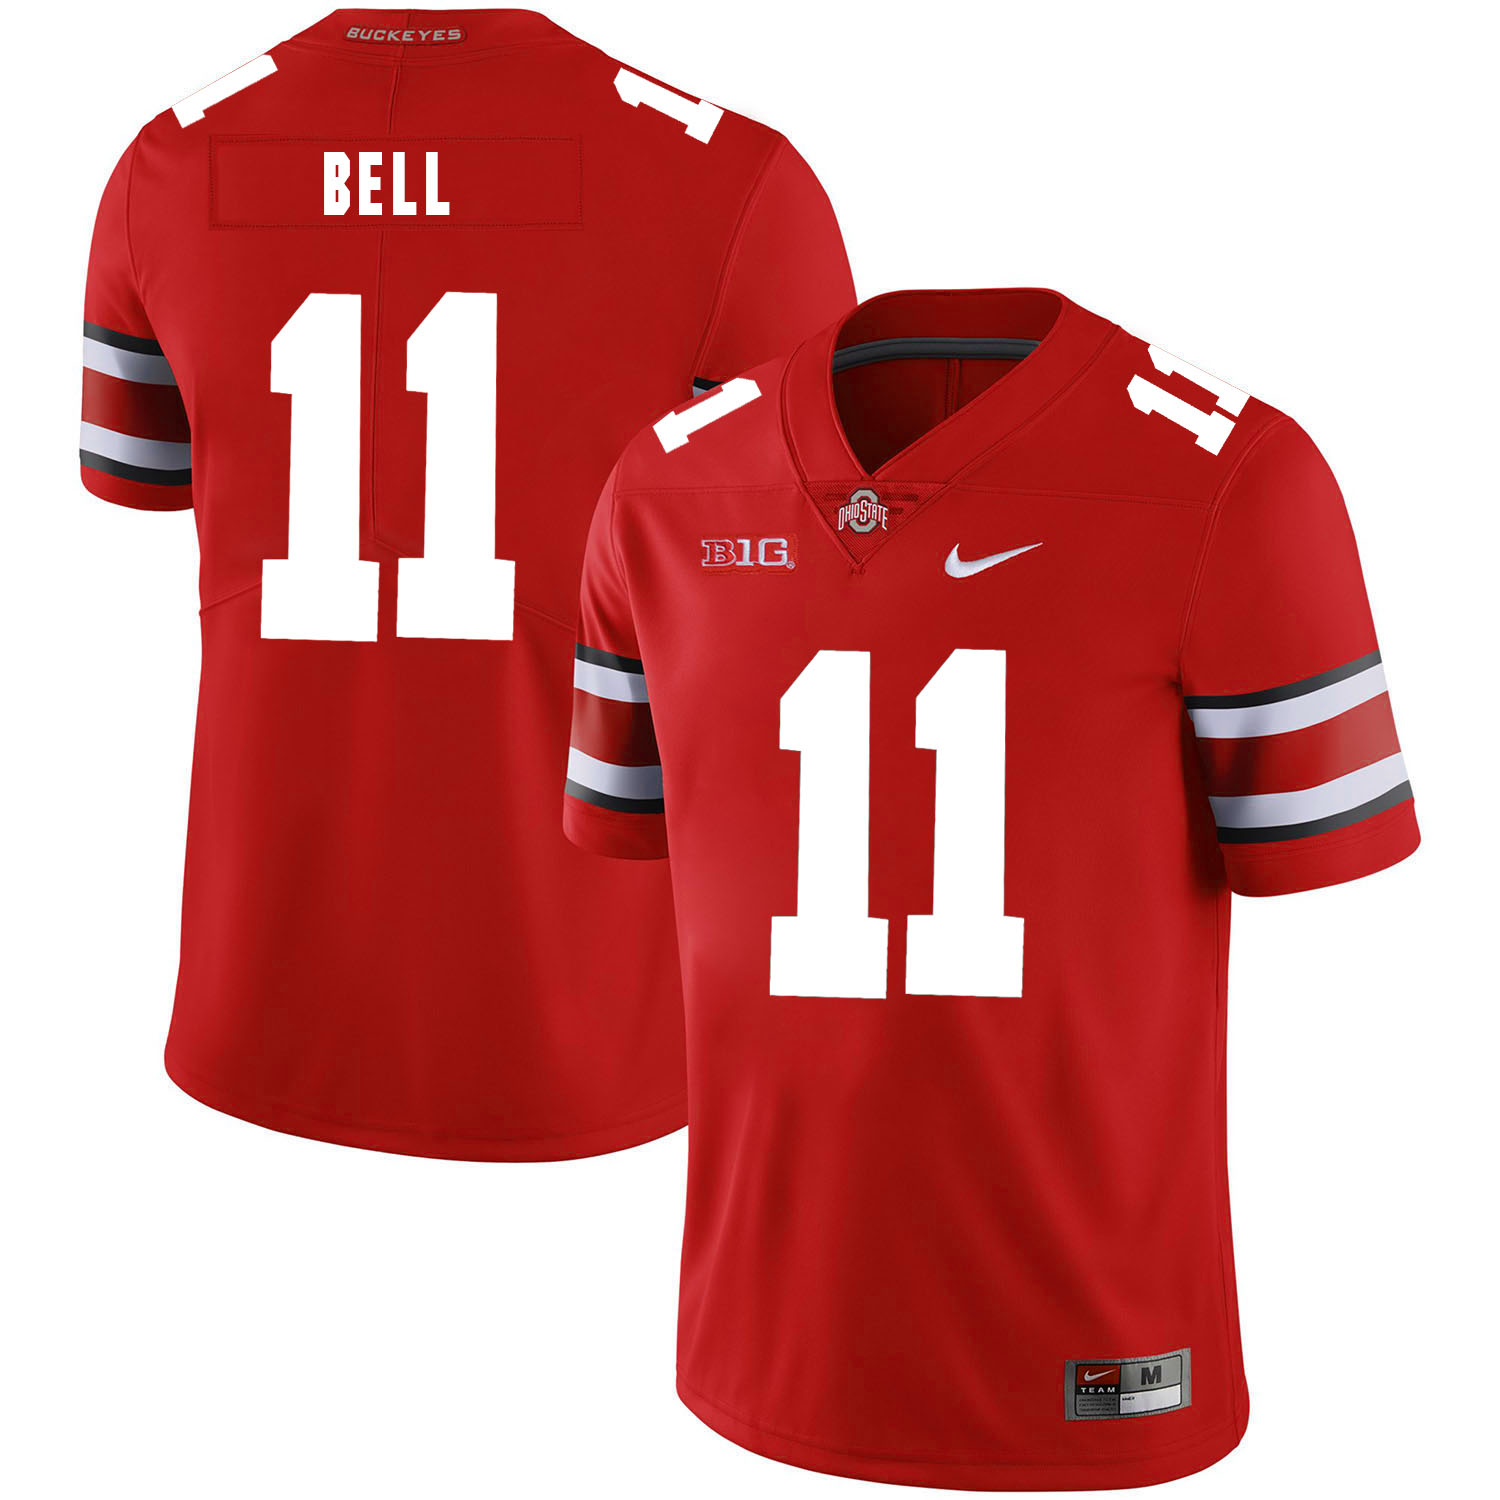 Ohio State Buckeyes 11 Vonn Bell Red Nike College Football Jersey